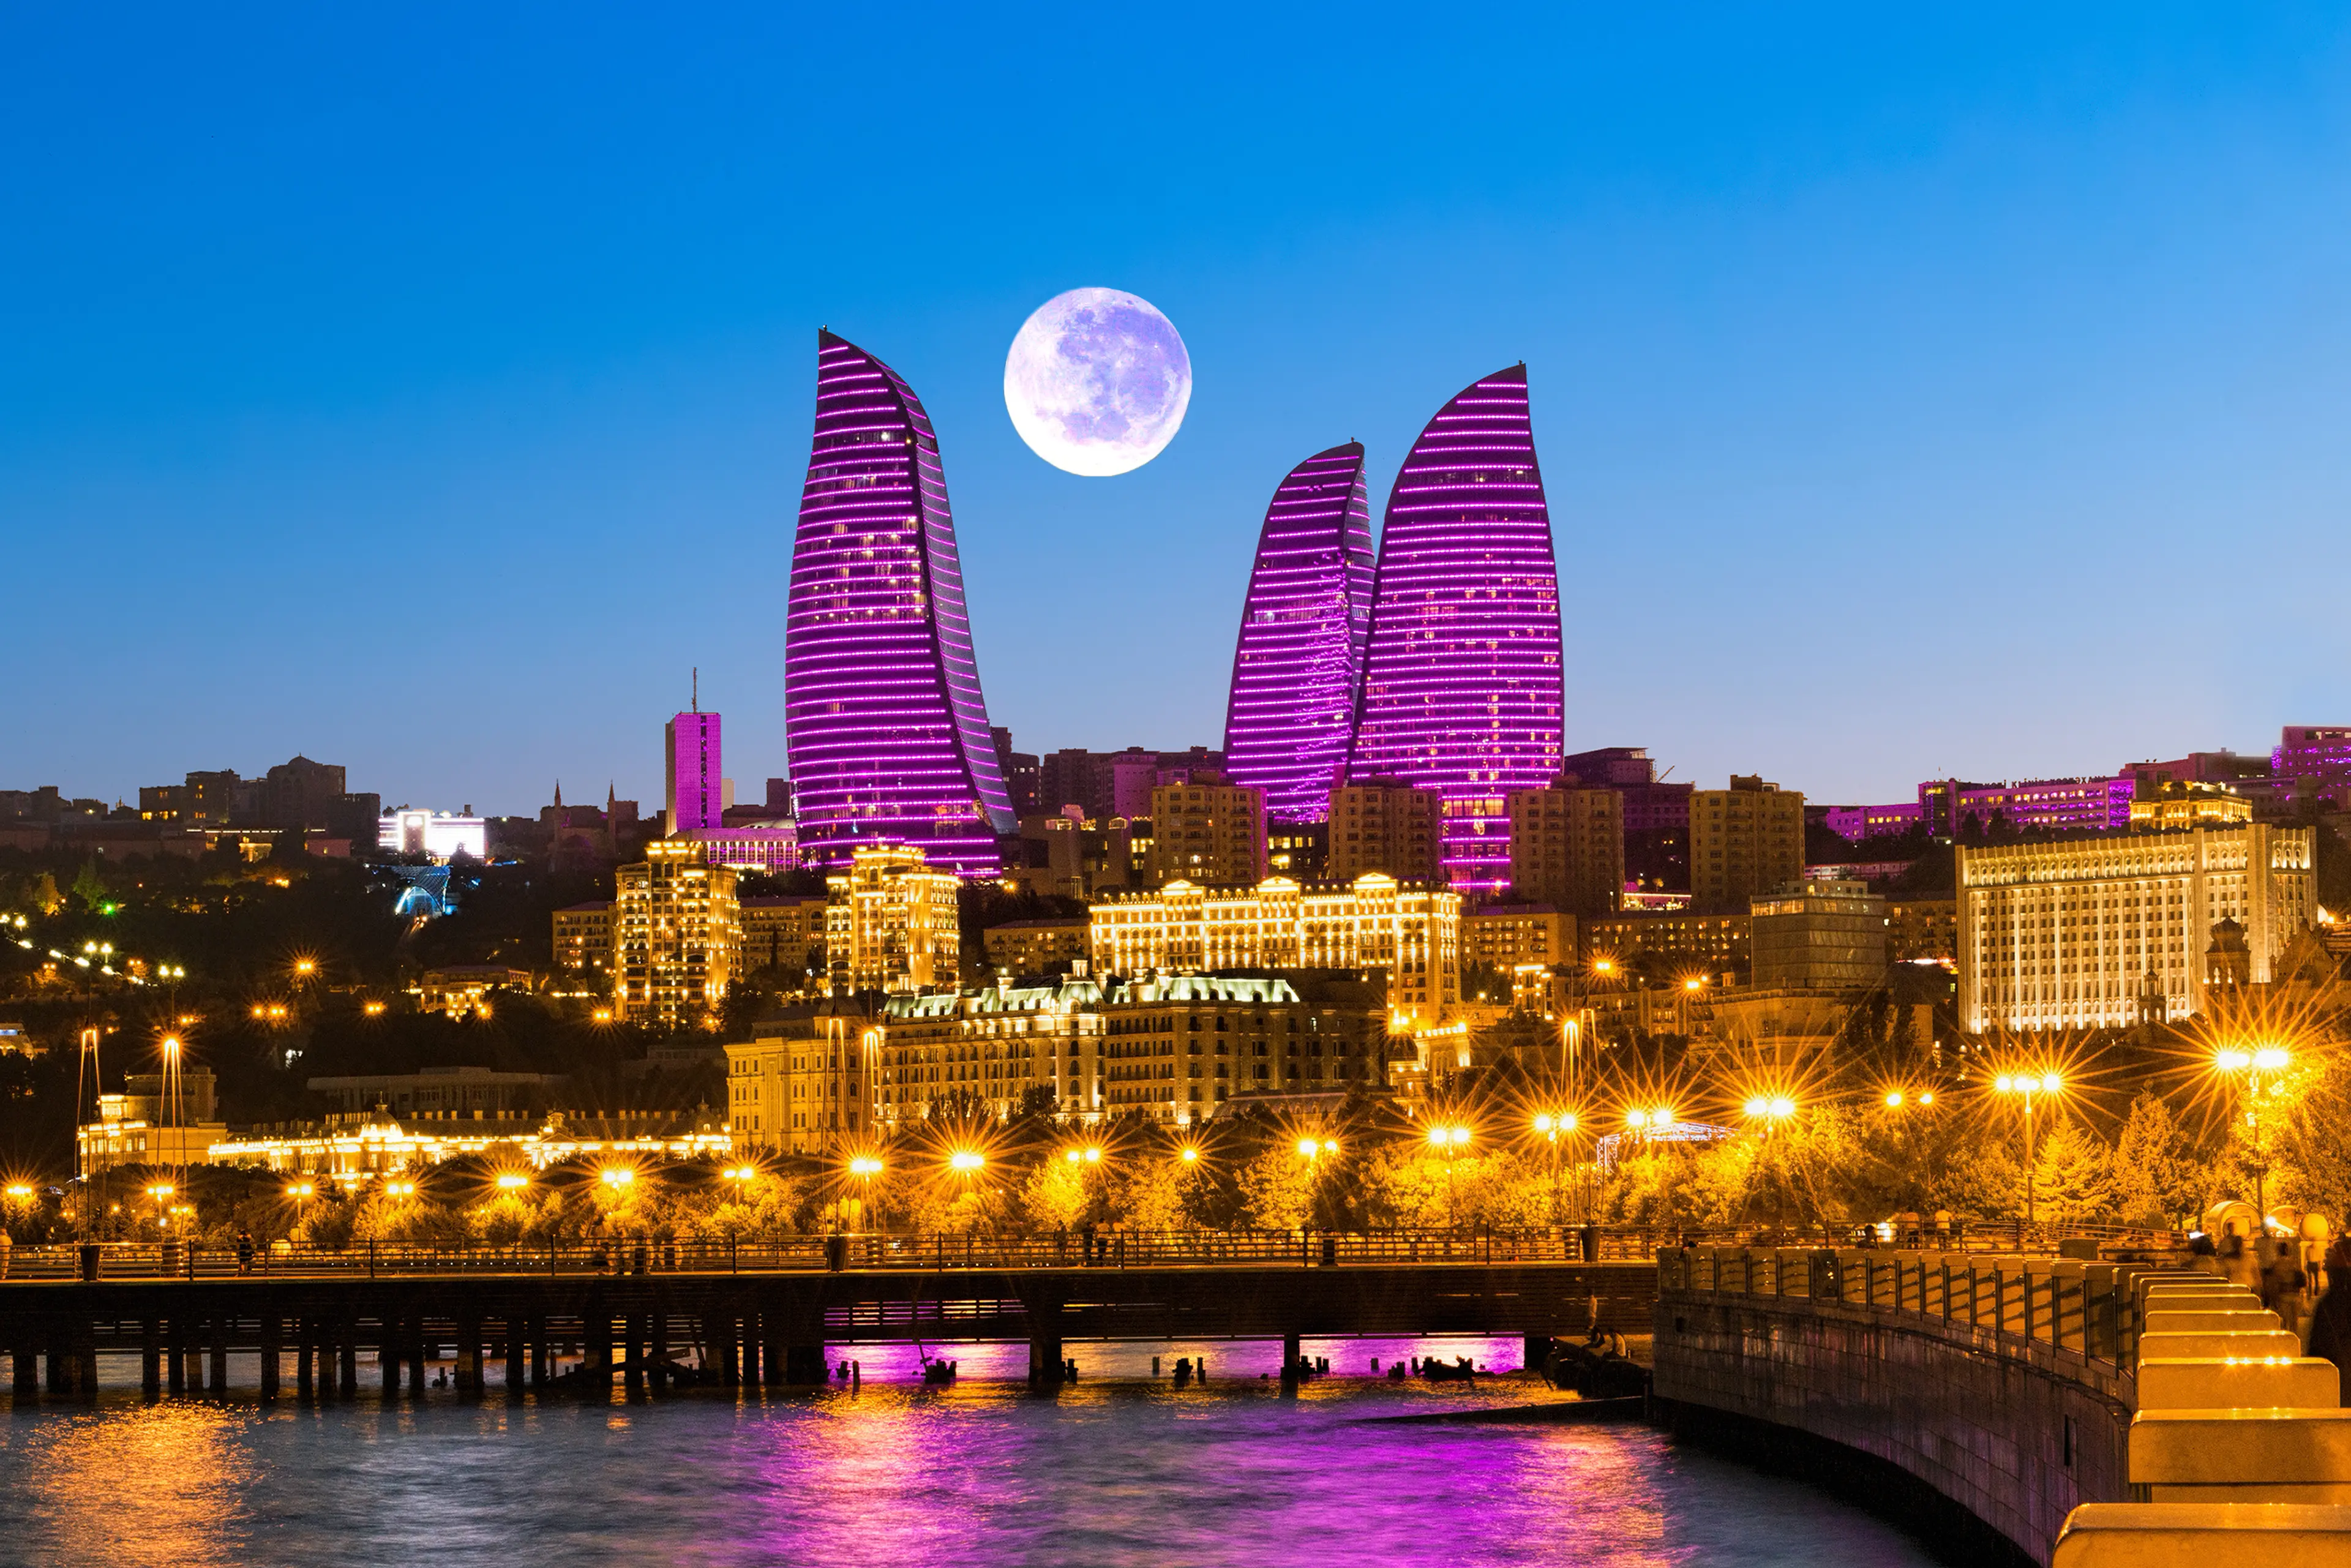 2-Day Hidden Gem Baku Trip for Couples: Gourmet Delights and Relaxation